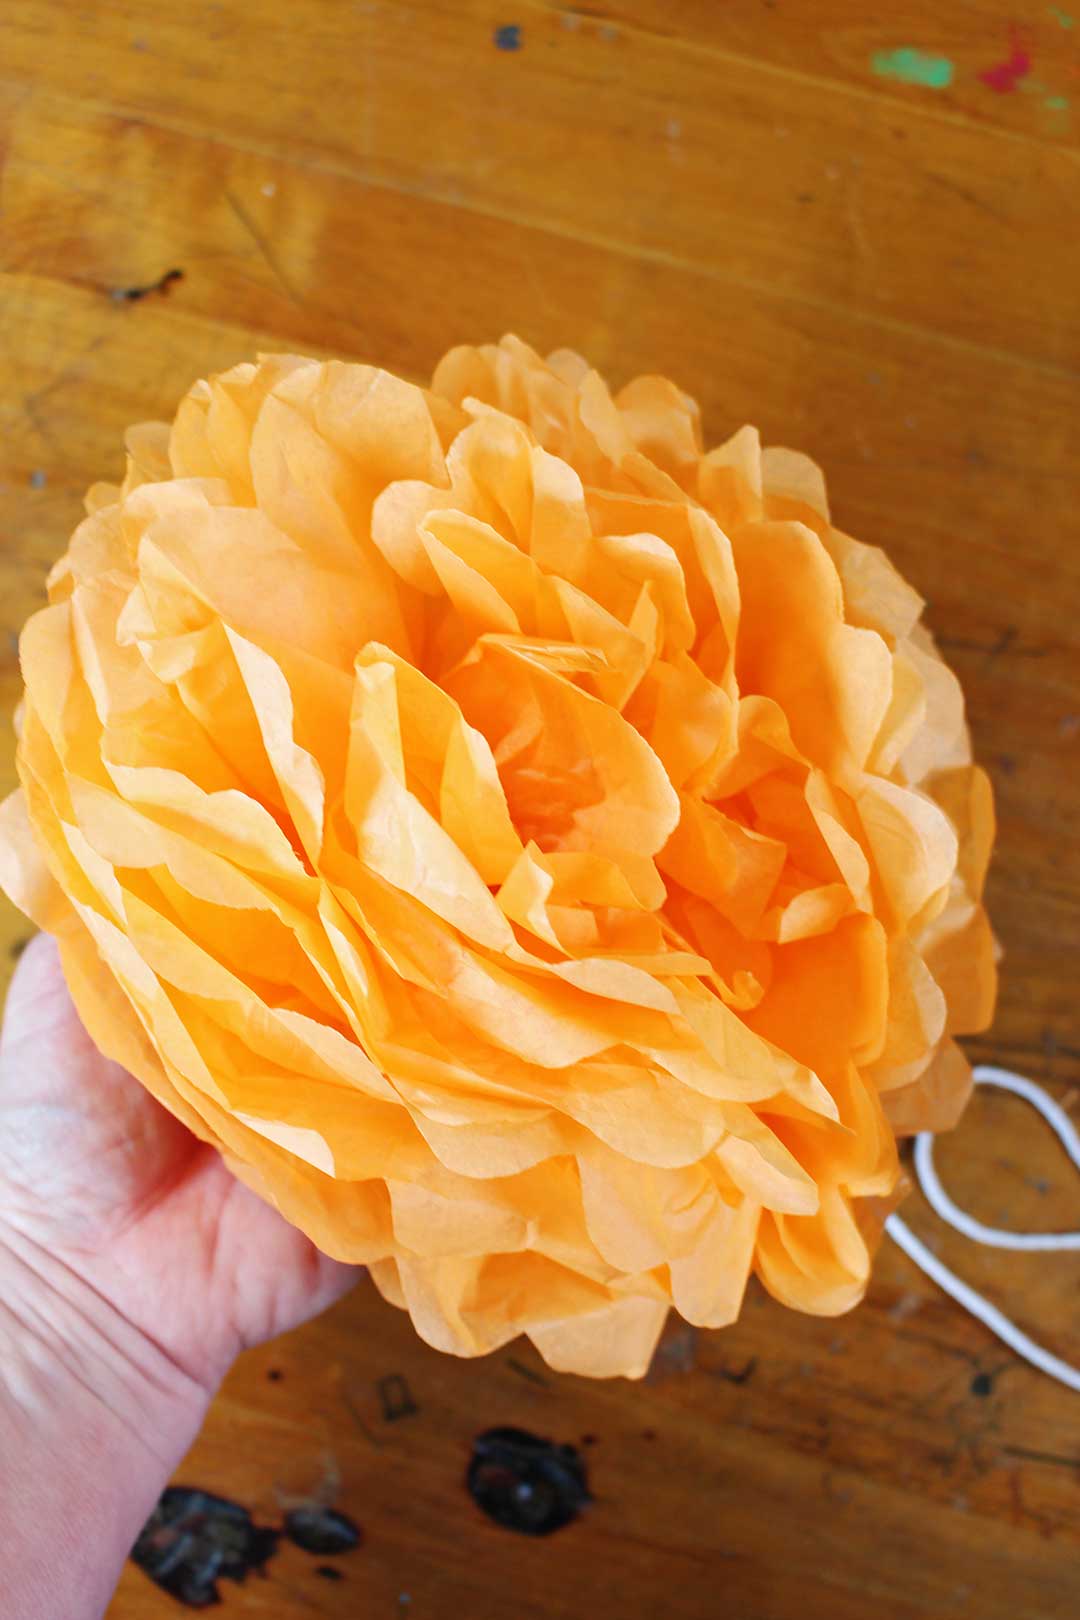 Hand holding up completed orange tissue paper flower.